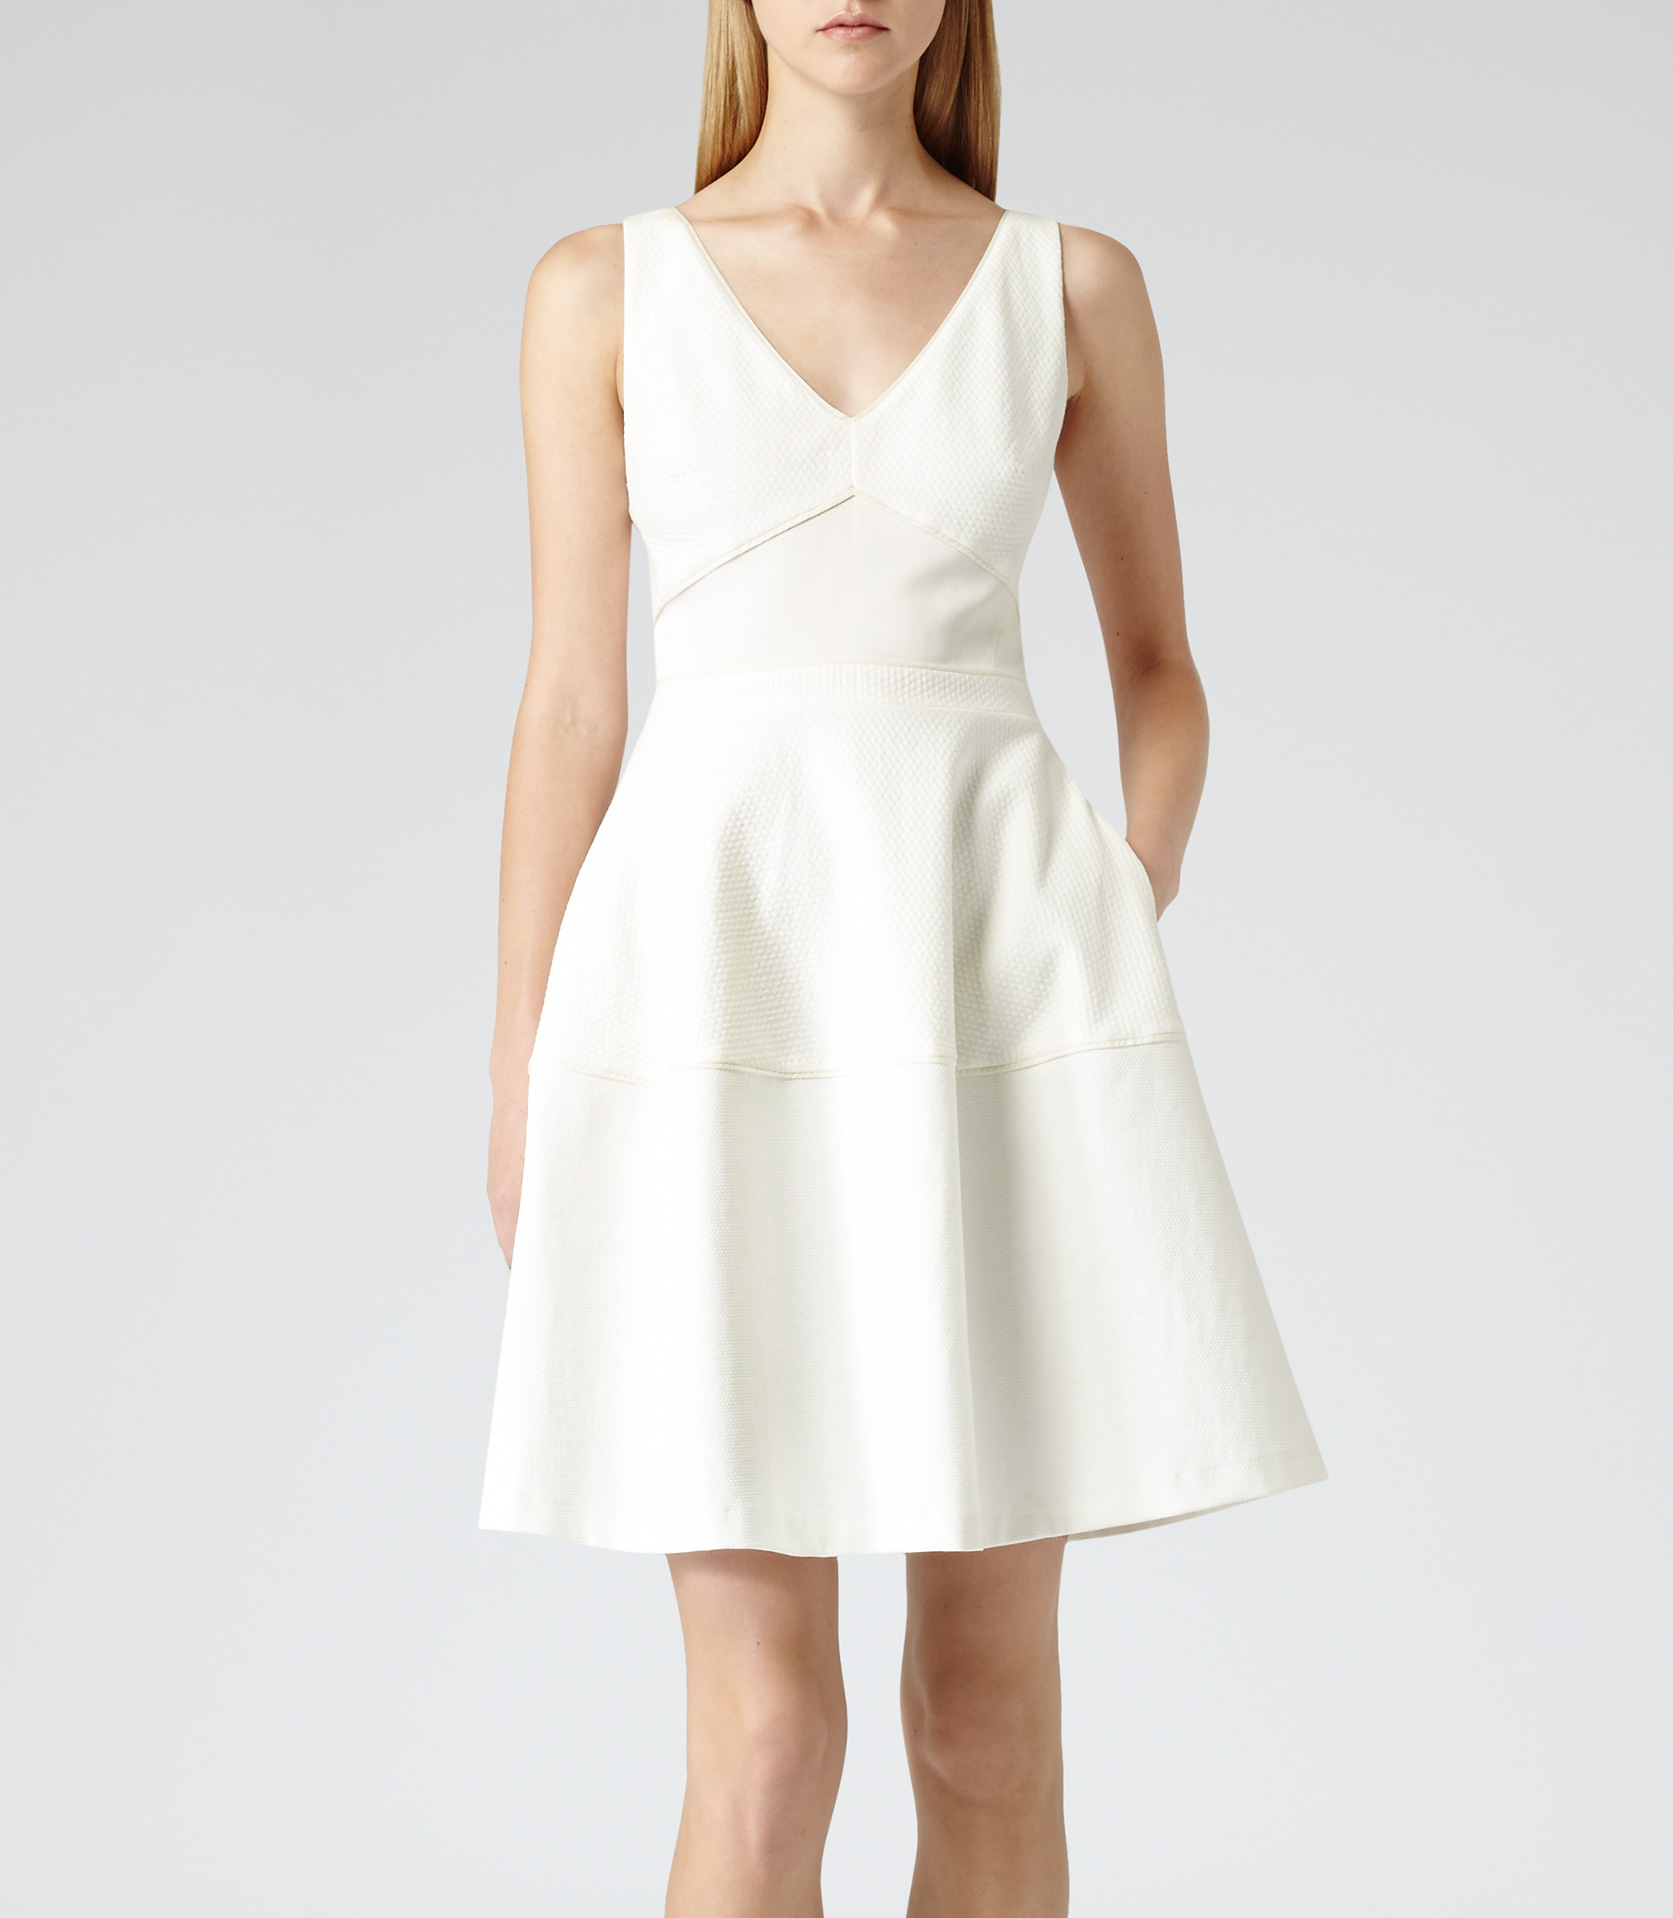 Lyst - Reiss Natalia Panel Fit And Flare Dress in White